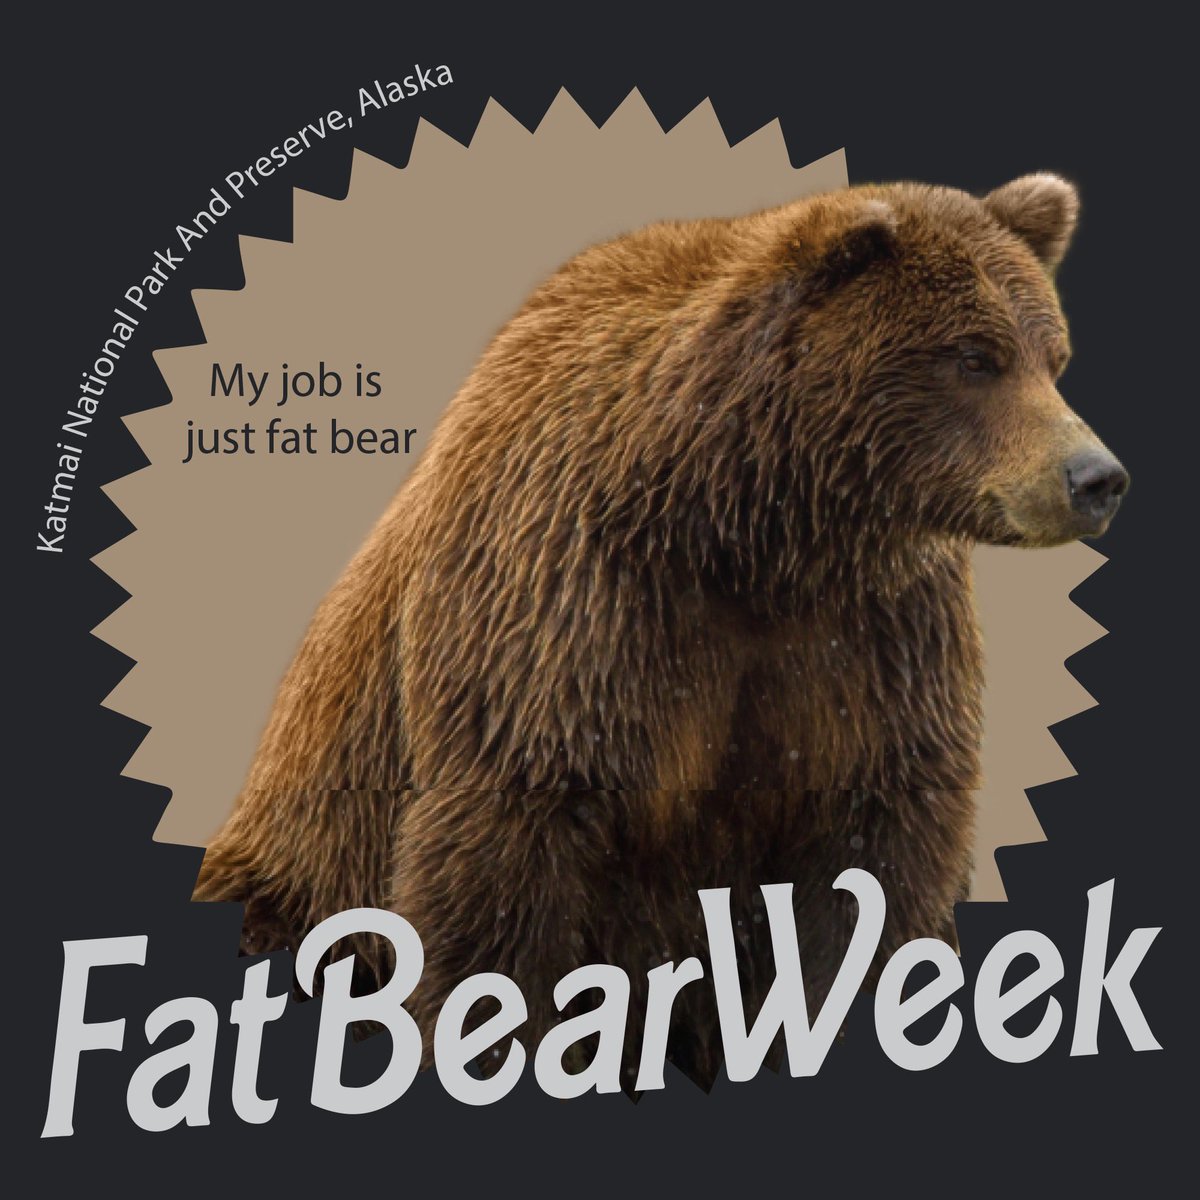 Today's the day! Every fall, @KatmaiNPS in Alaska hosts #FatBearWeek, an annual tournament celebrating the success of the bears winter prep.